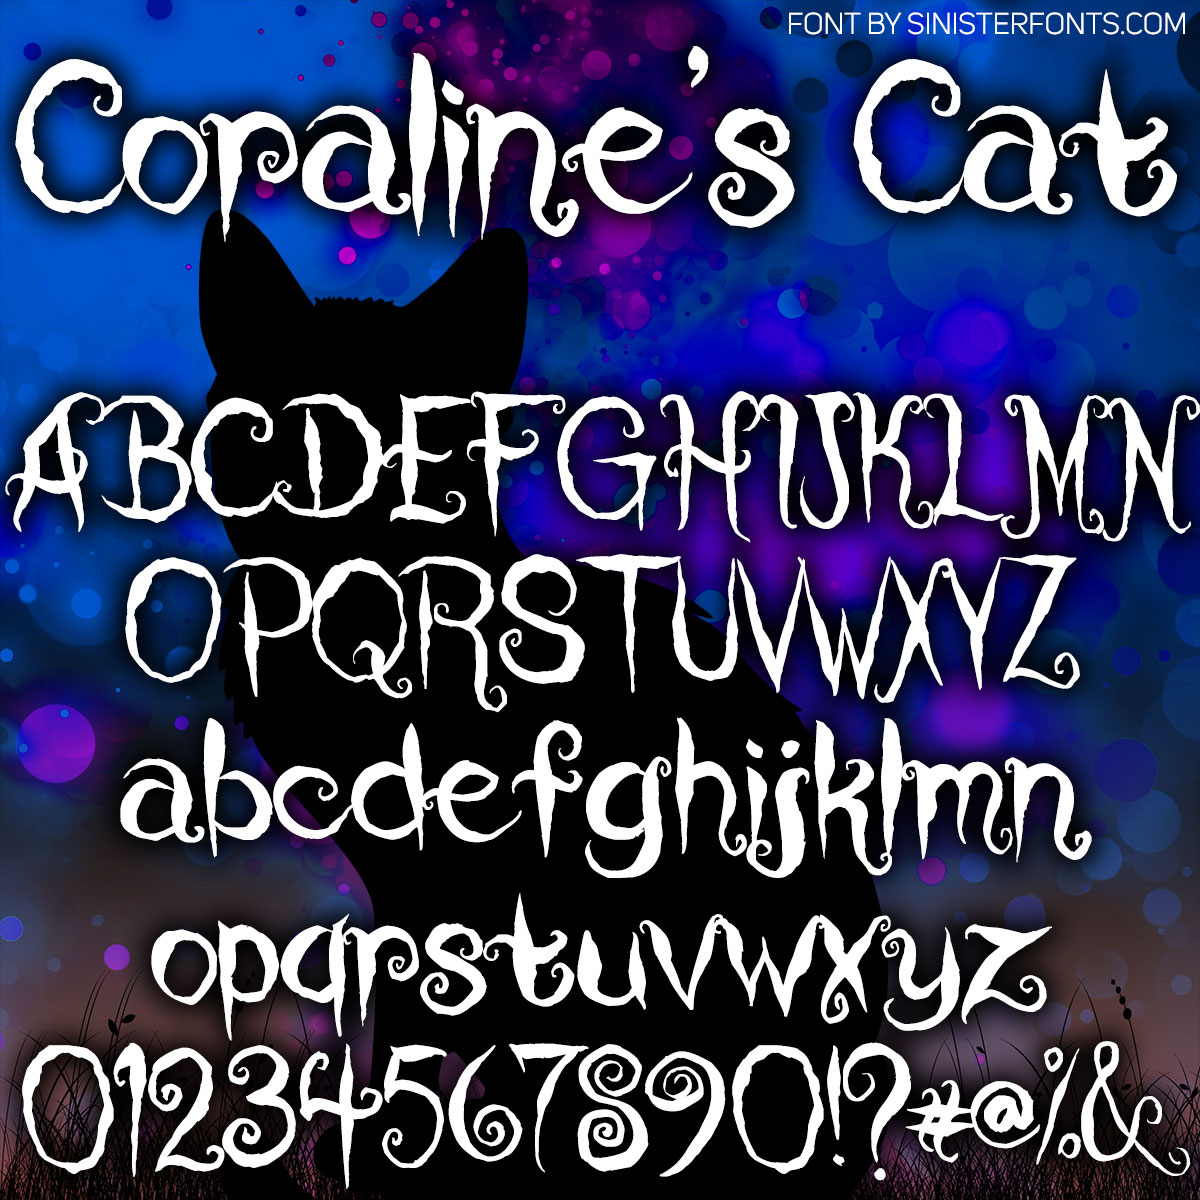 Coraline's Cat Font : Click to Download